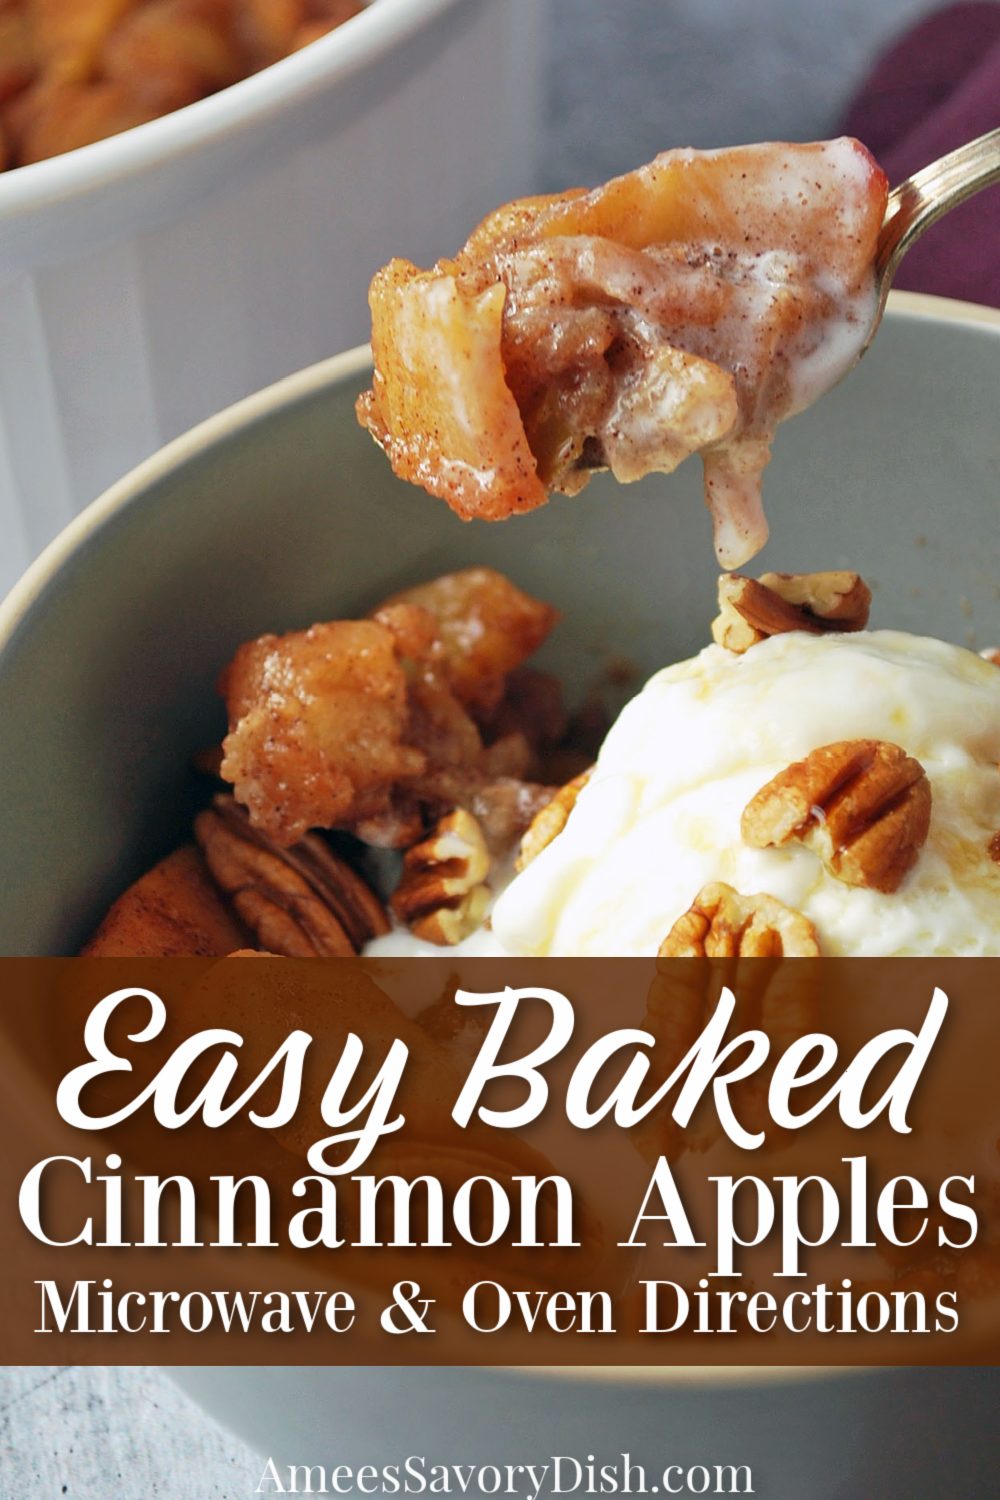 An easy recipe for cinnamon baked apples that can be made in the oven or the microwave. They are the perfect healthy fall dessert! via @Ameessavorydish